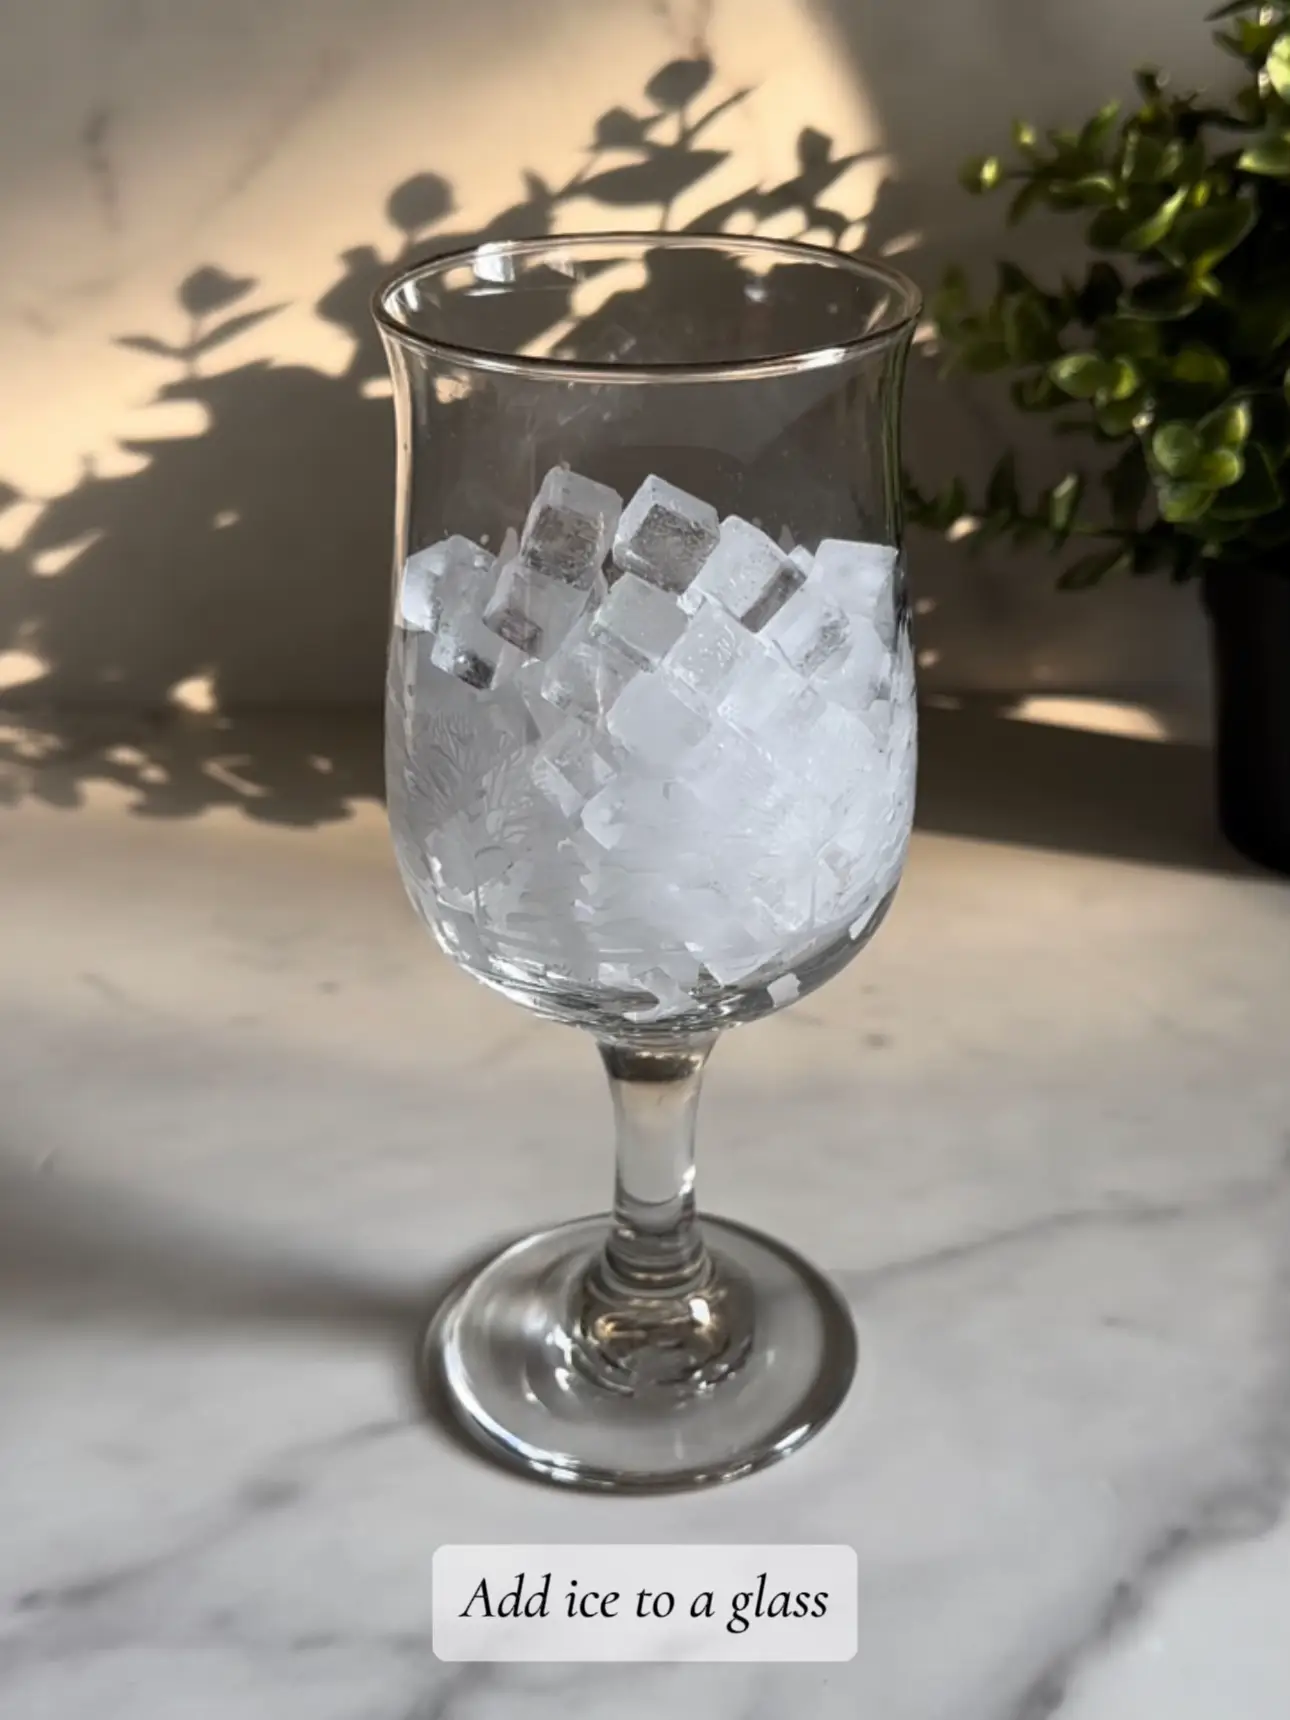  A glass of ice water.